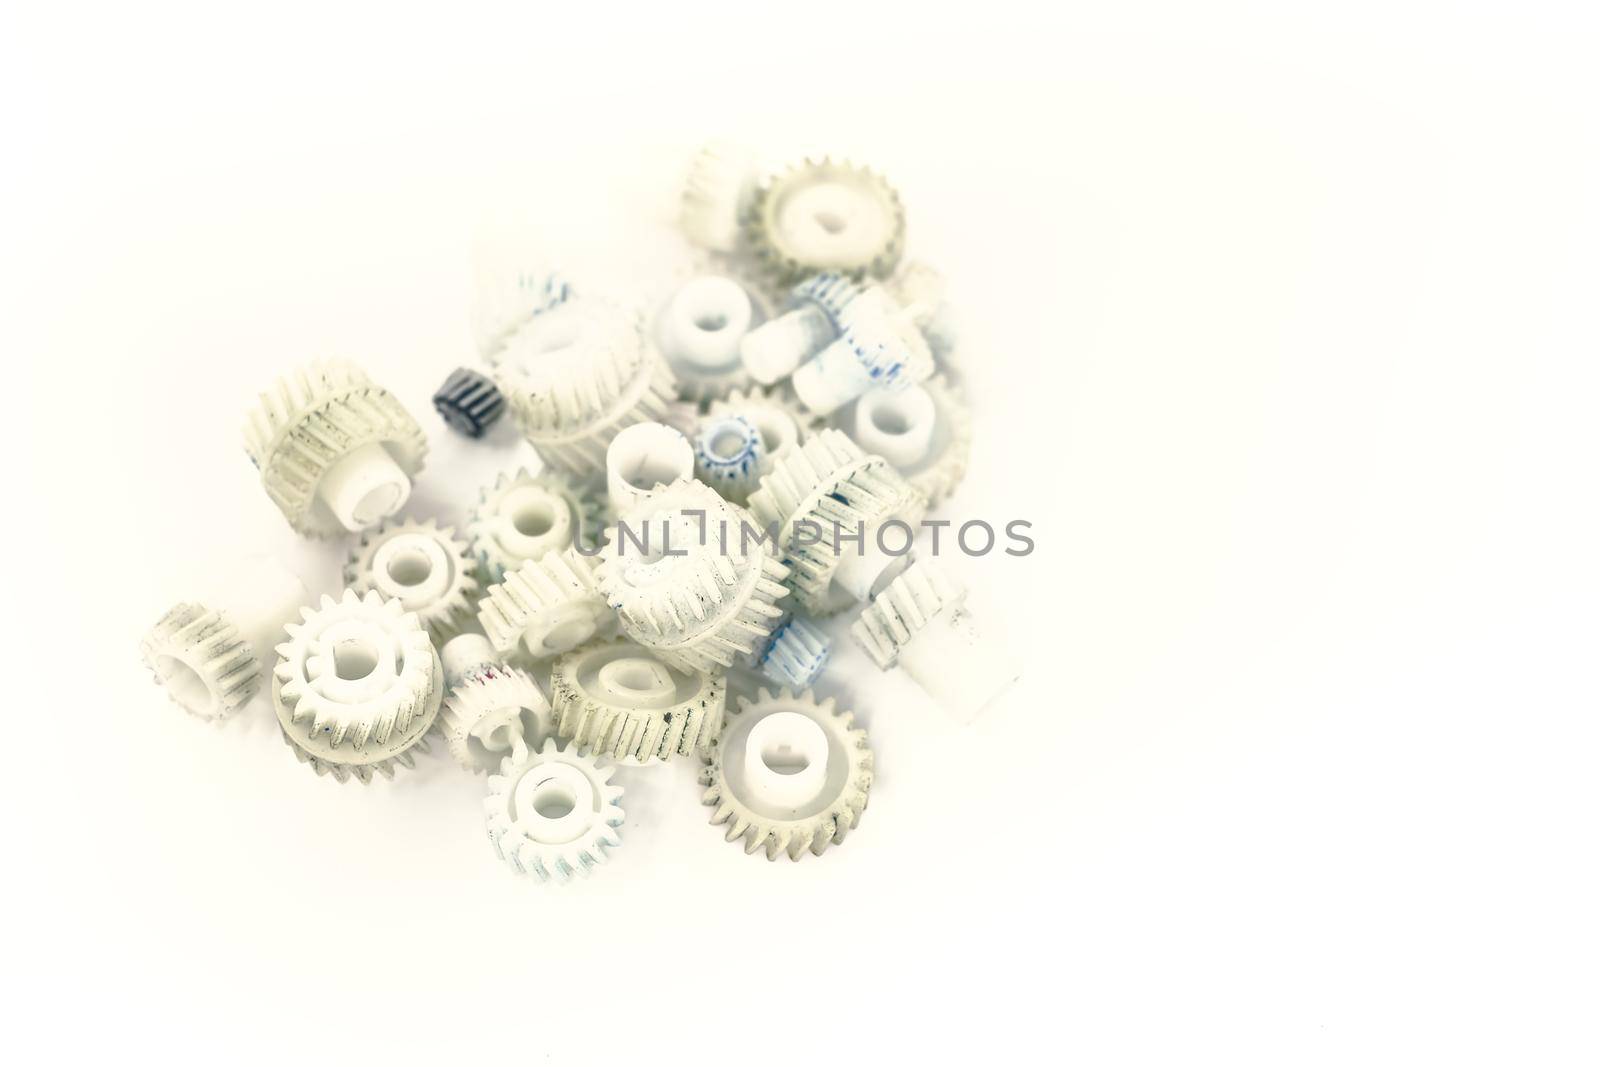 Dirty plastic gears on white background by Roberto